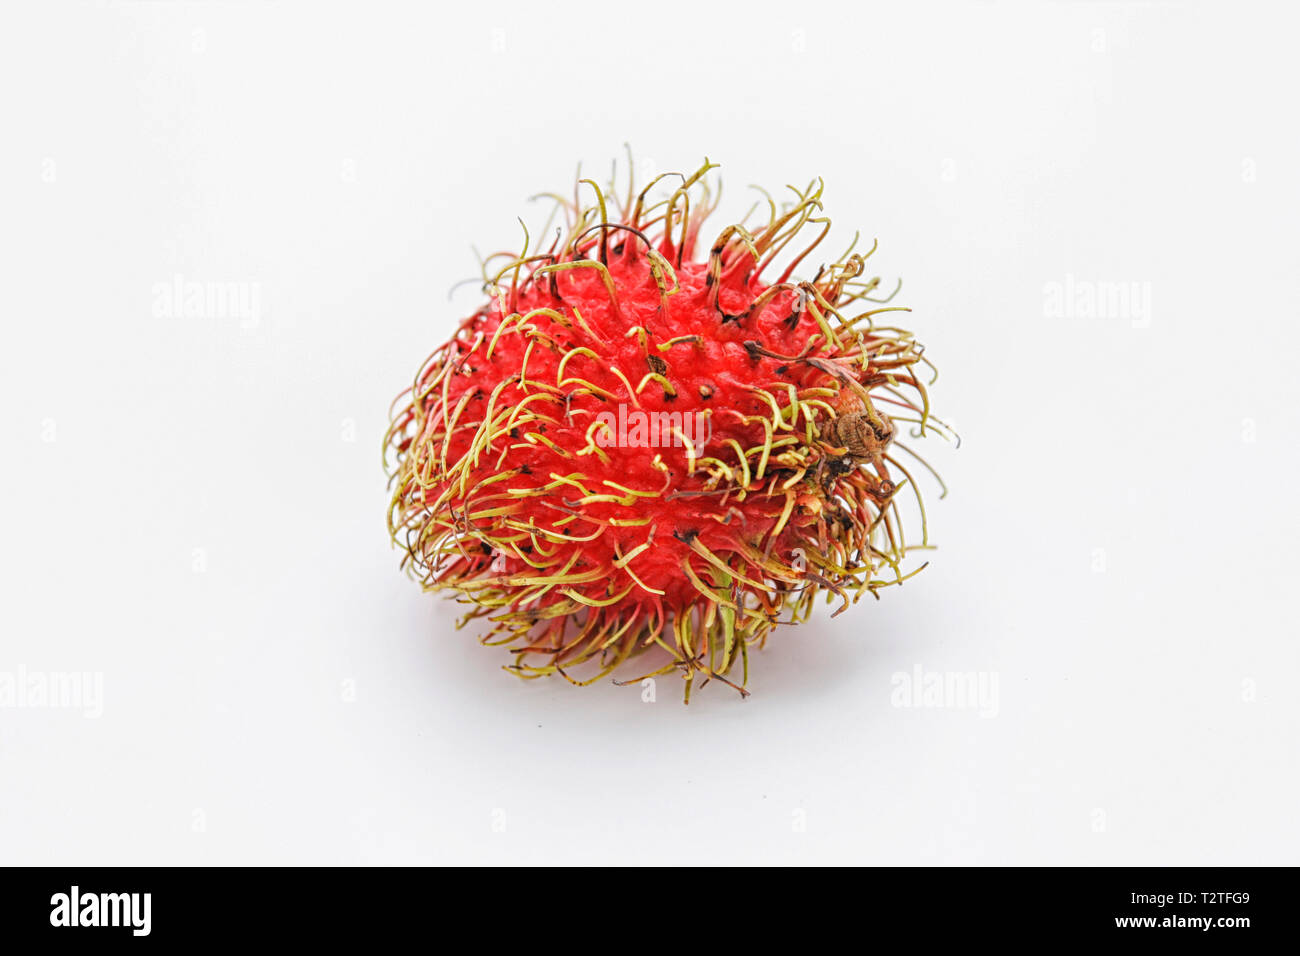 Asian fruit with hairy exterior but sweet interior Stock Photo